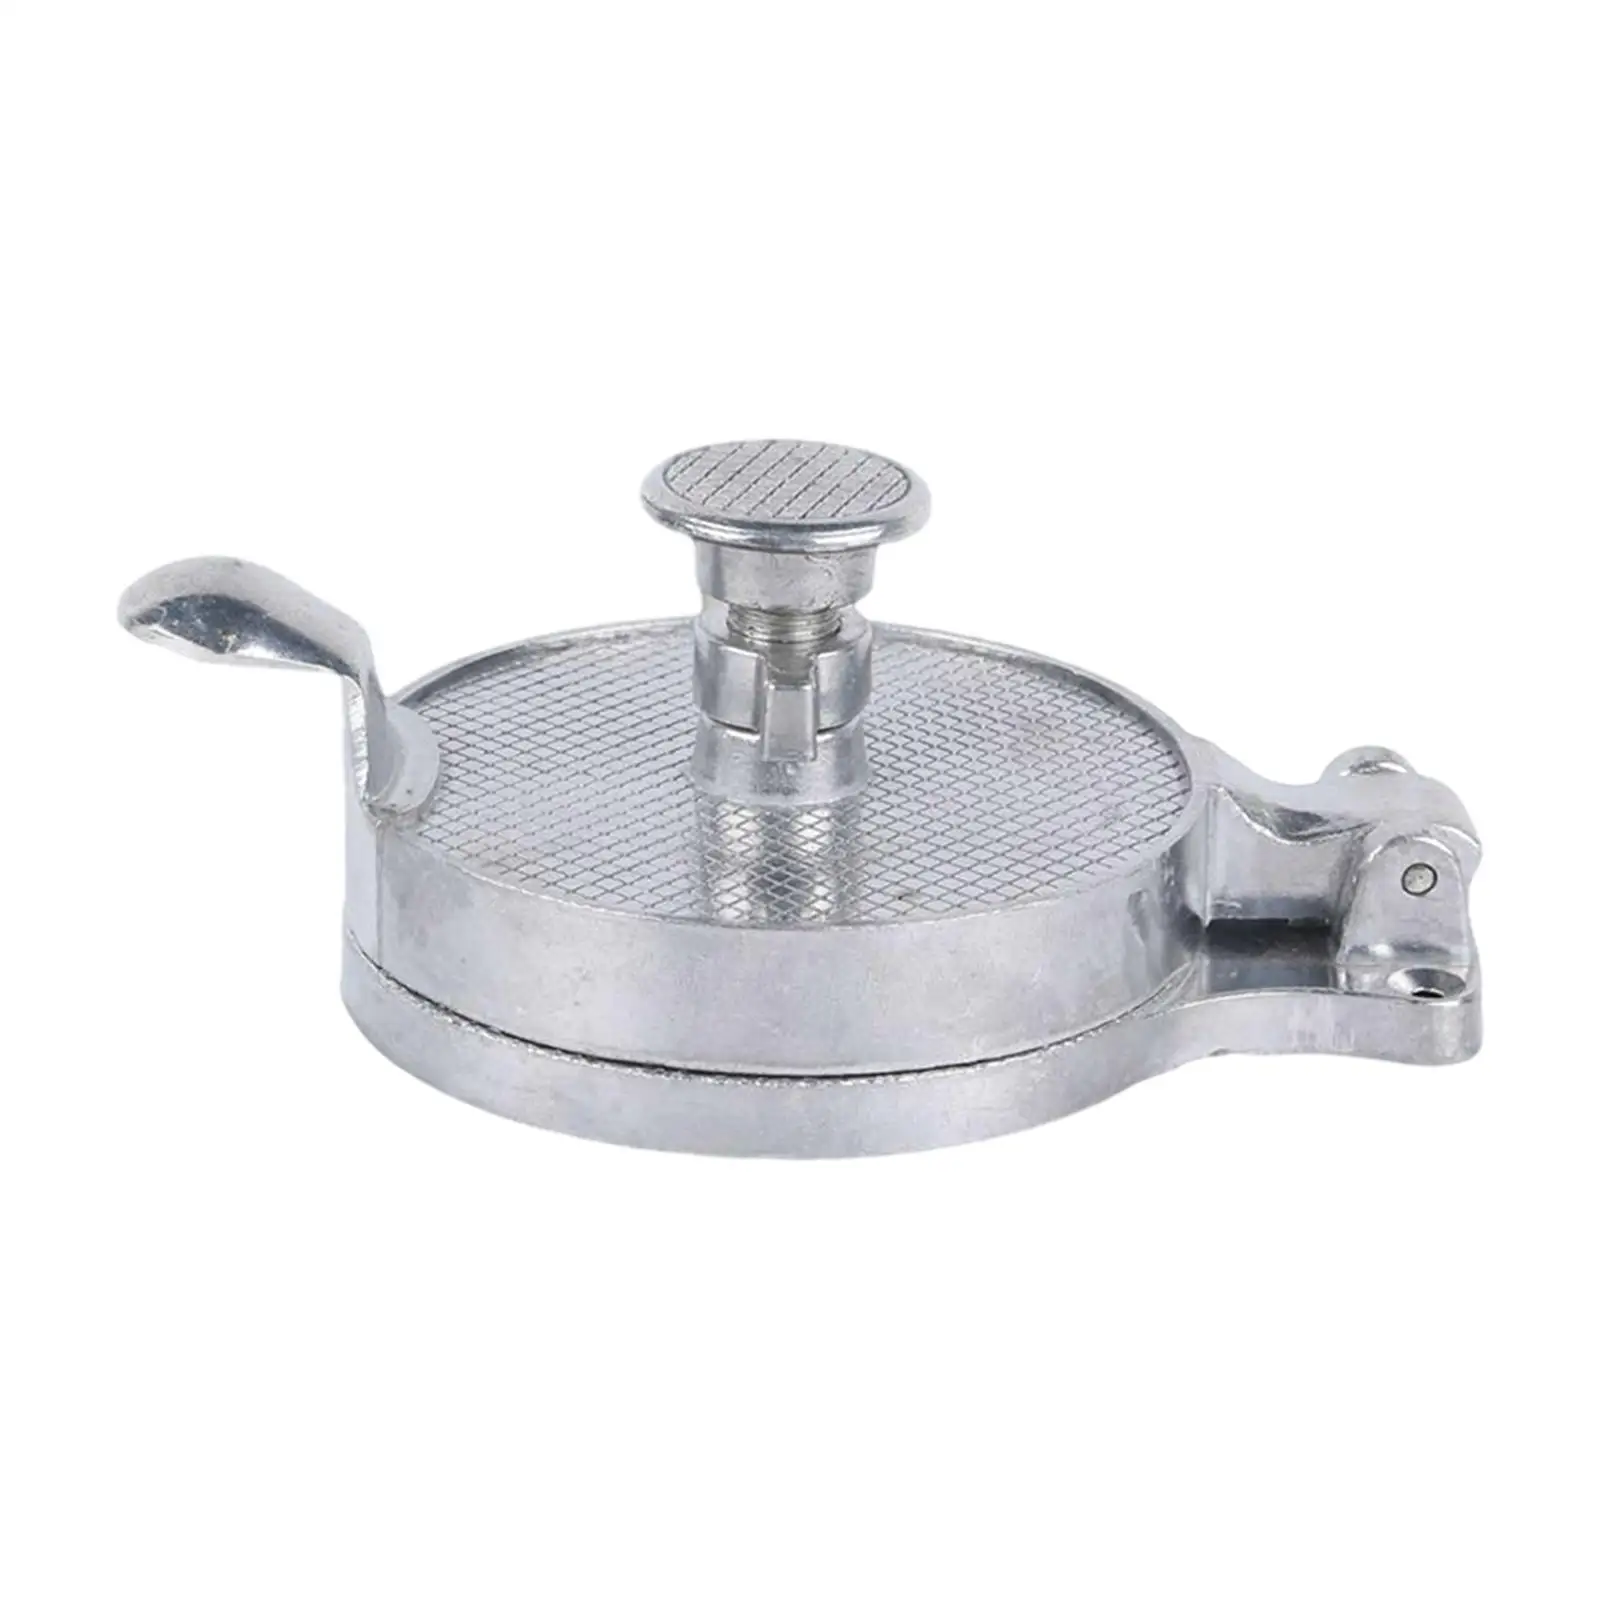 Stainless Steel Burger Press Hamburger Patty Maker for Barbecue Sandwiches